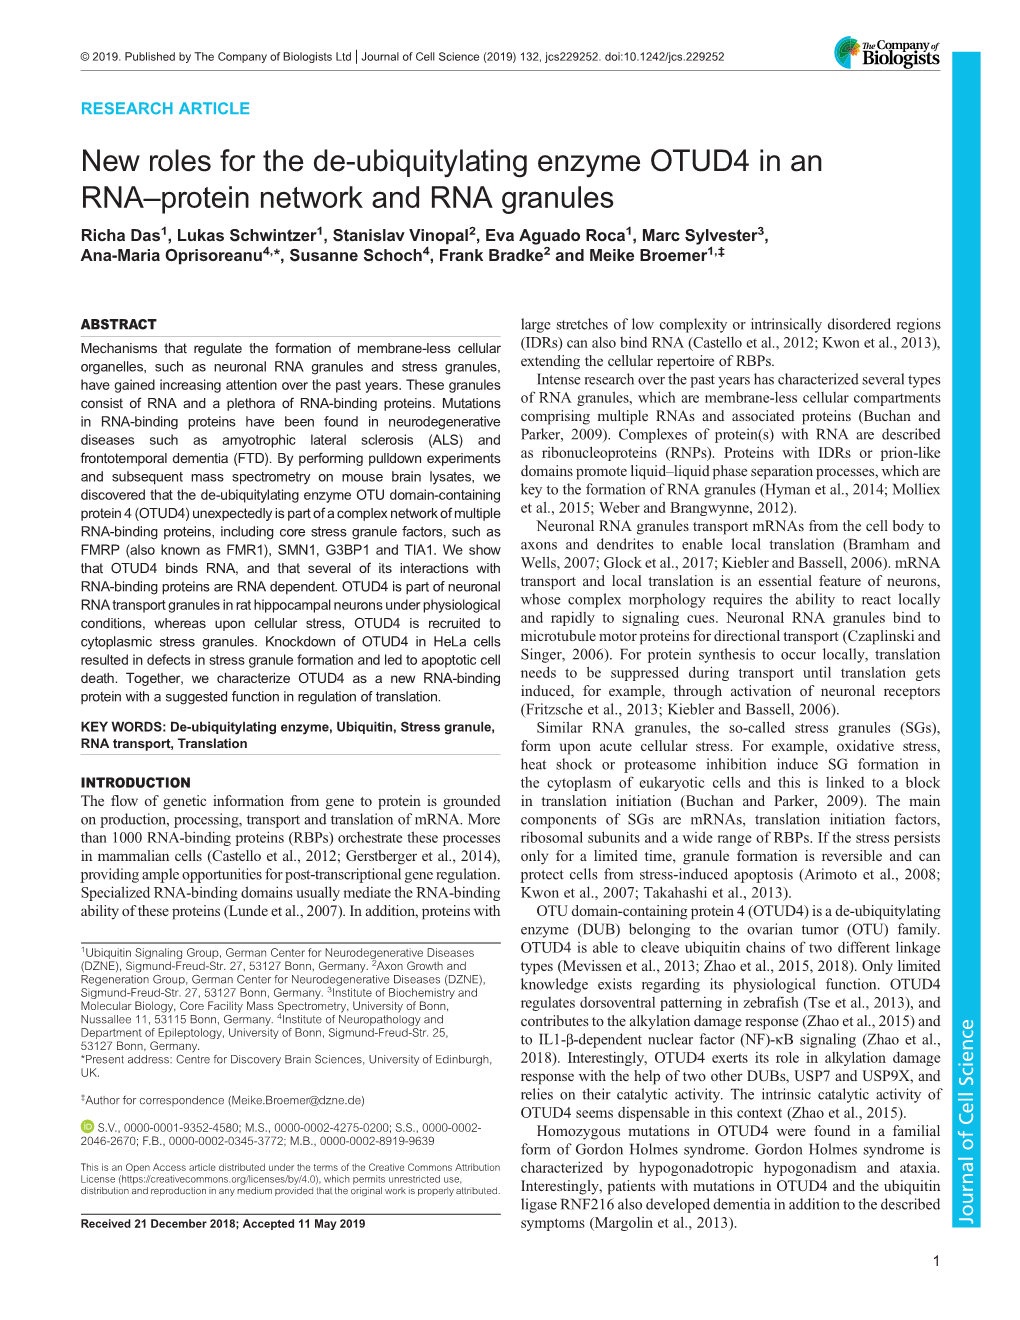 New Roles for the De-Ubiquitylating Enzyme OTUD4 in an RNA–Protein